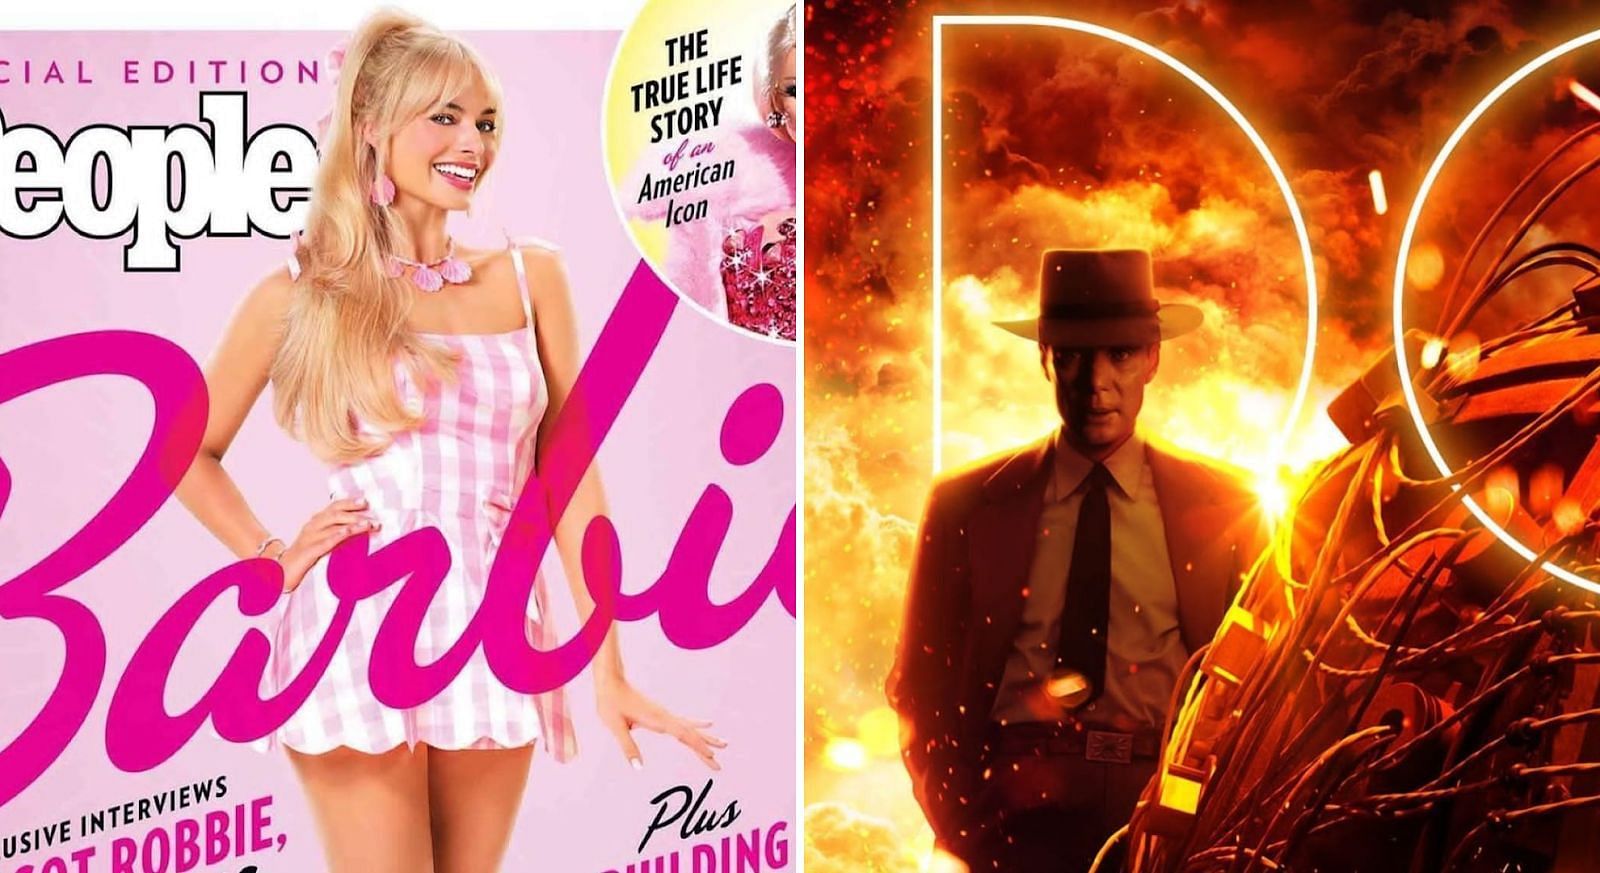 Which film is Barbie going to clash with?